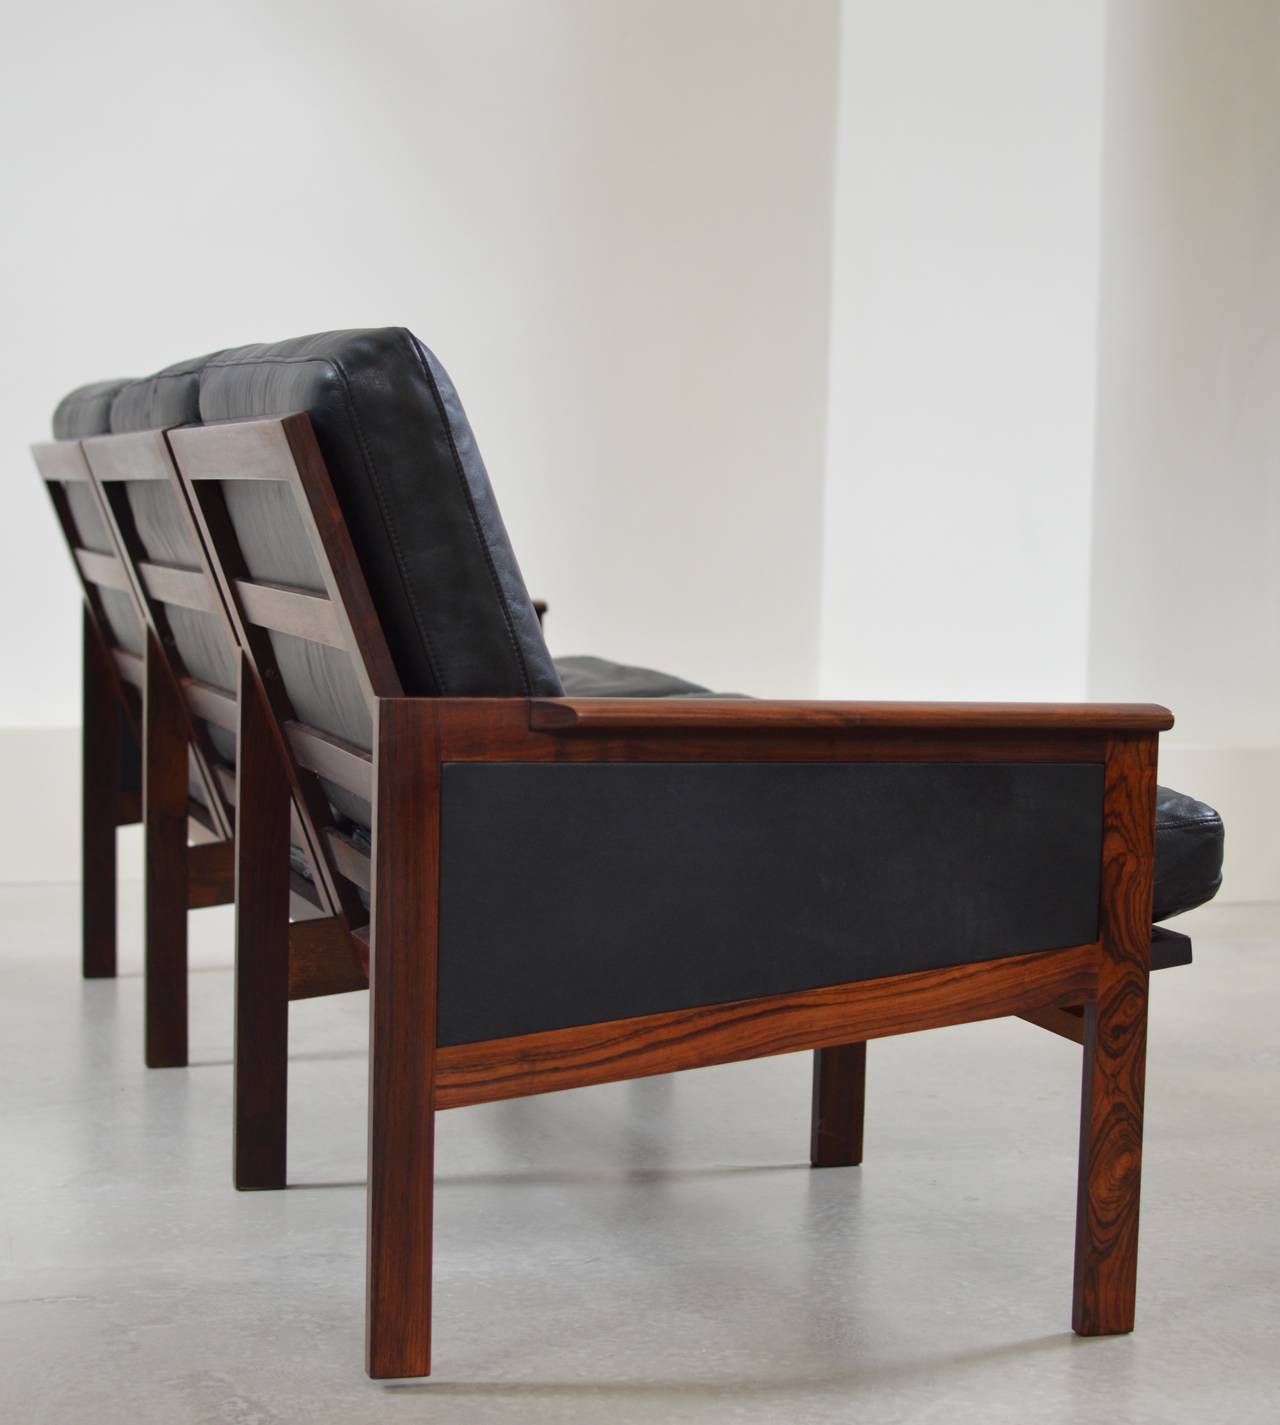 Danish Rosewood & Black Leather Sofa by Illum Wikkelso for N. Eilersen